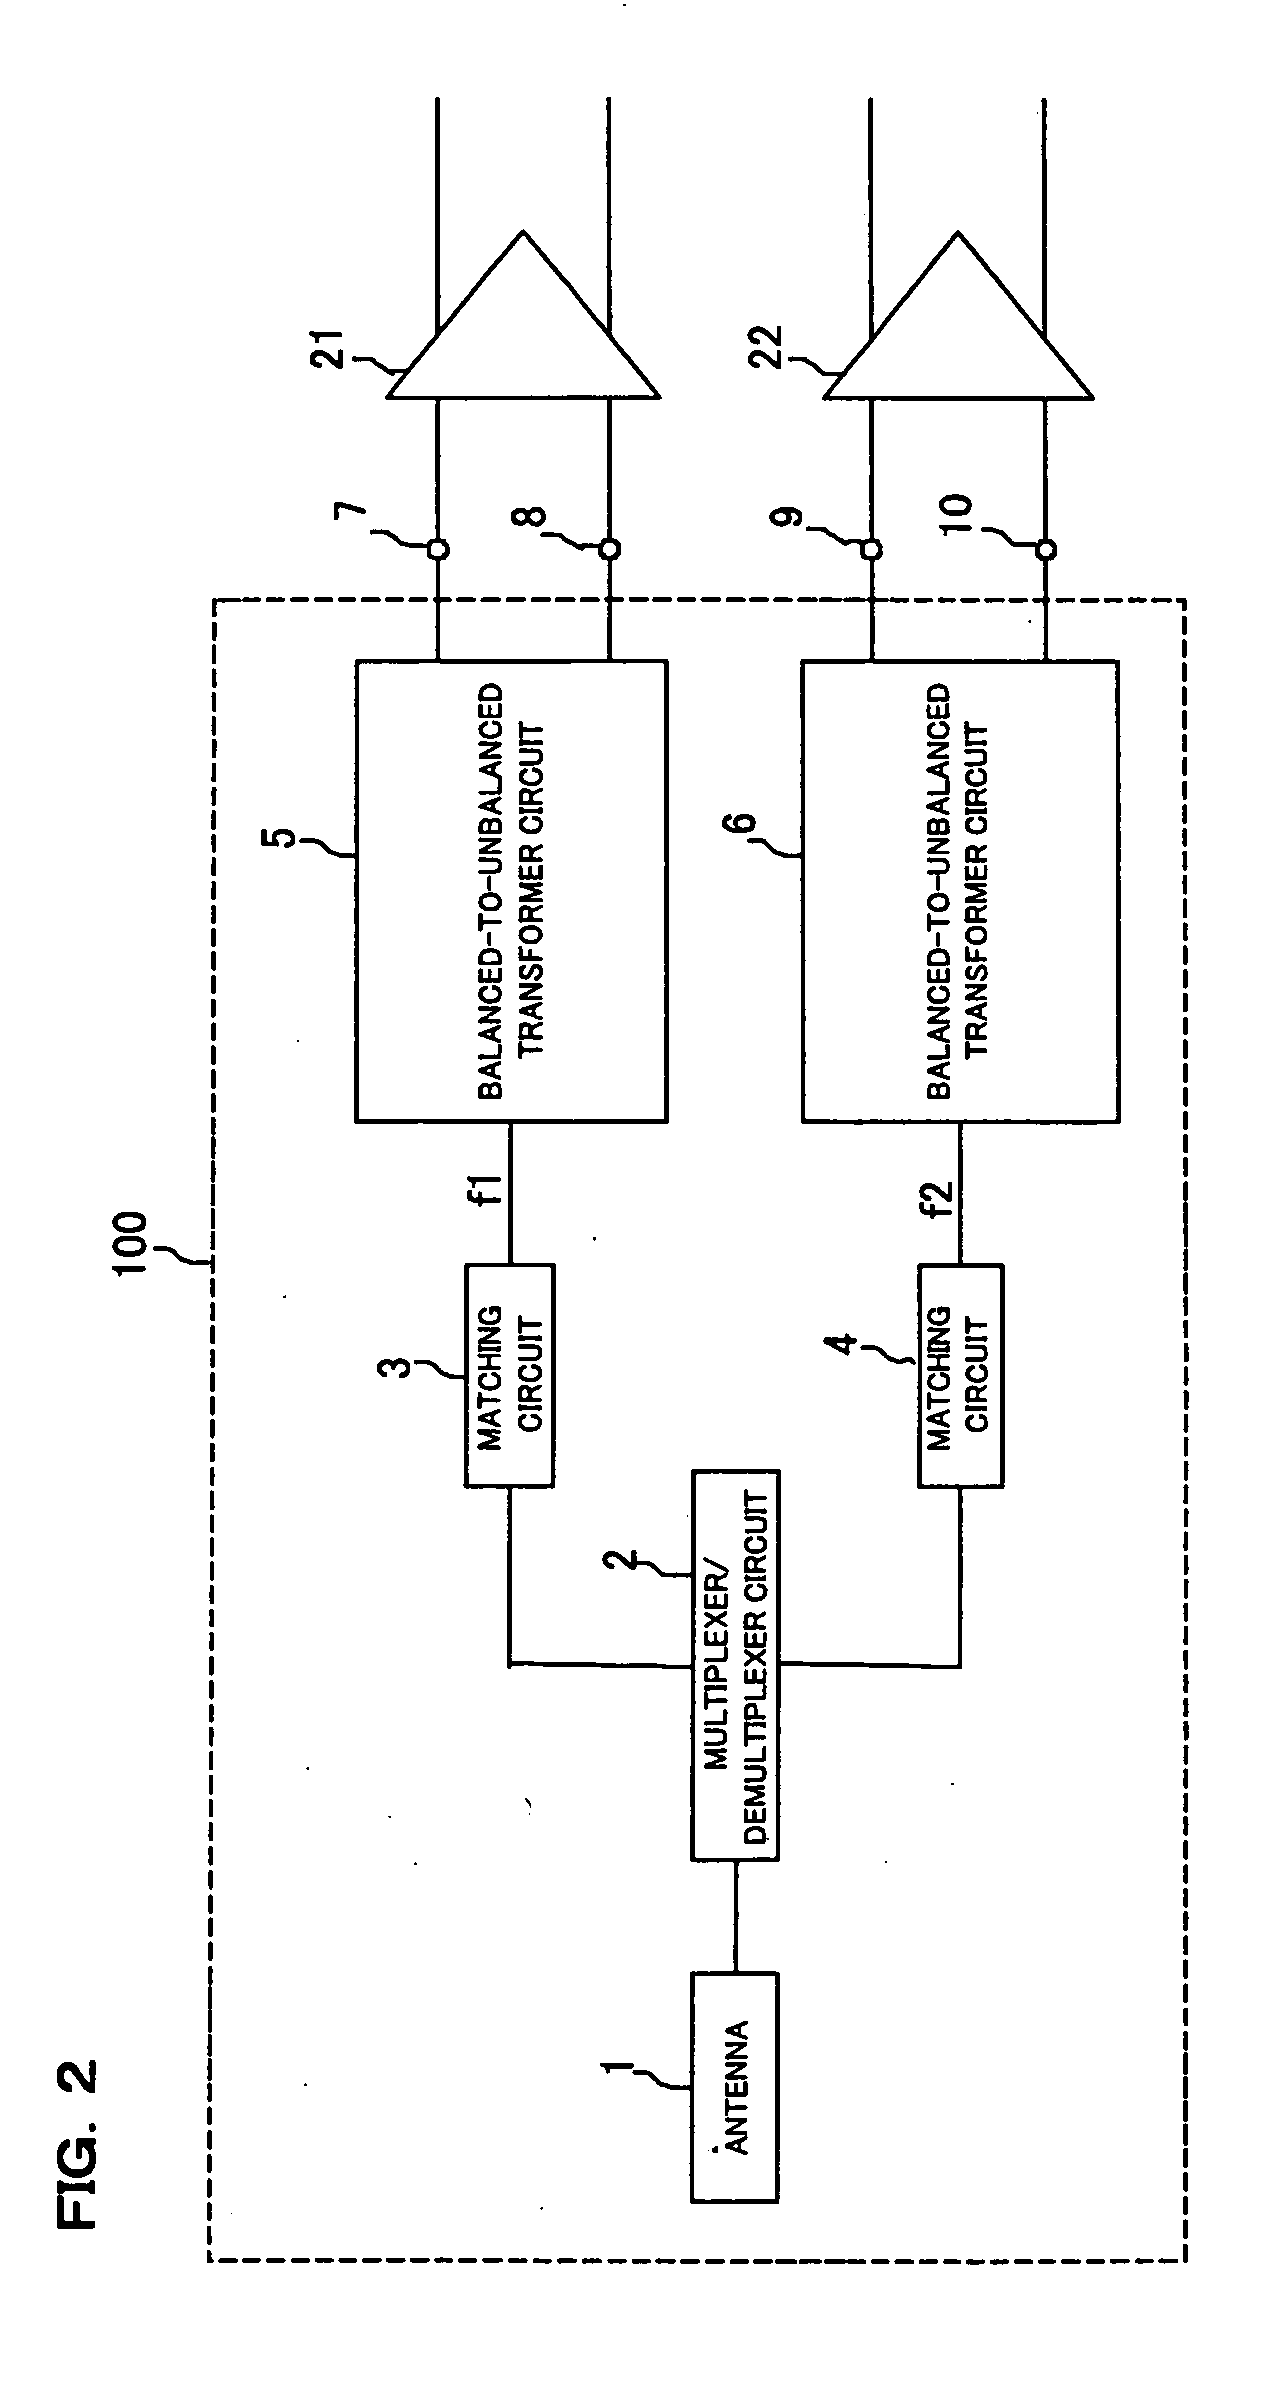 High-frequency composite component